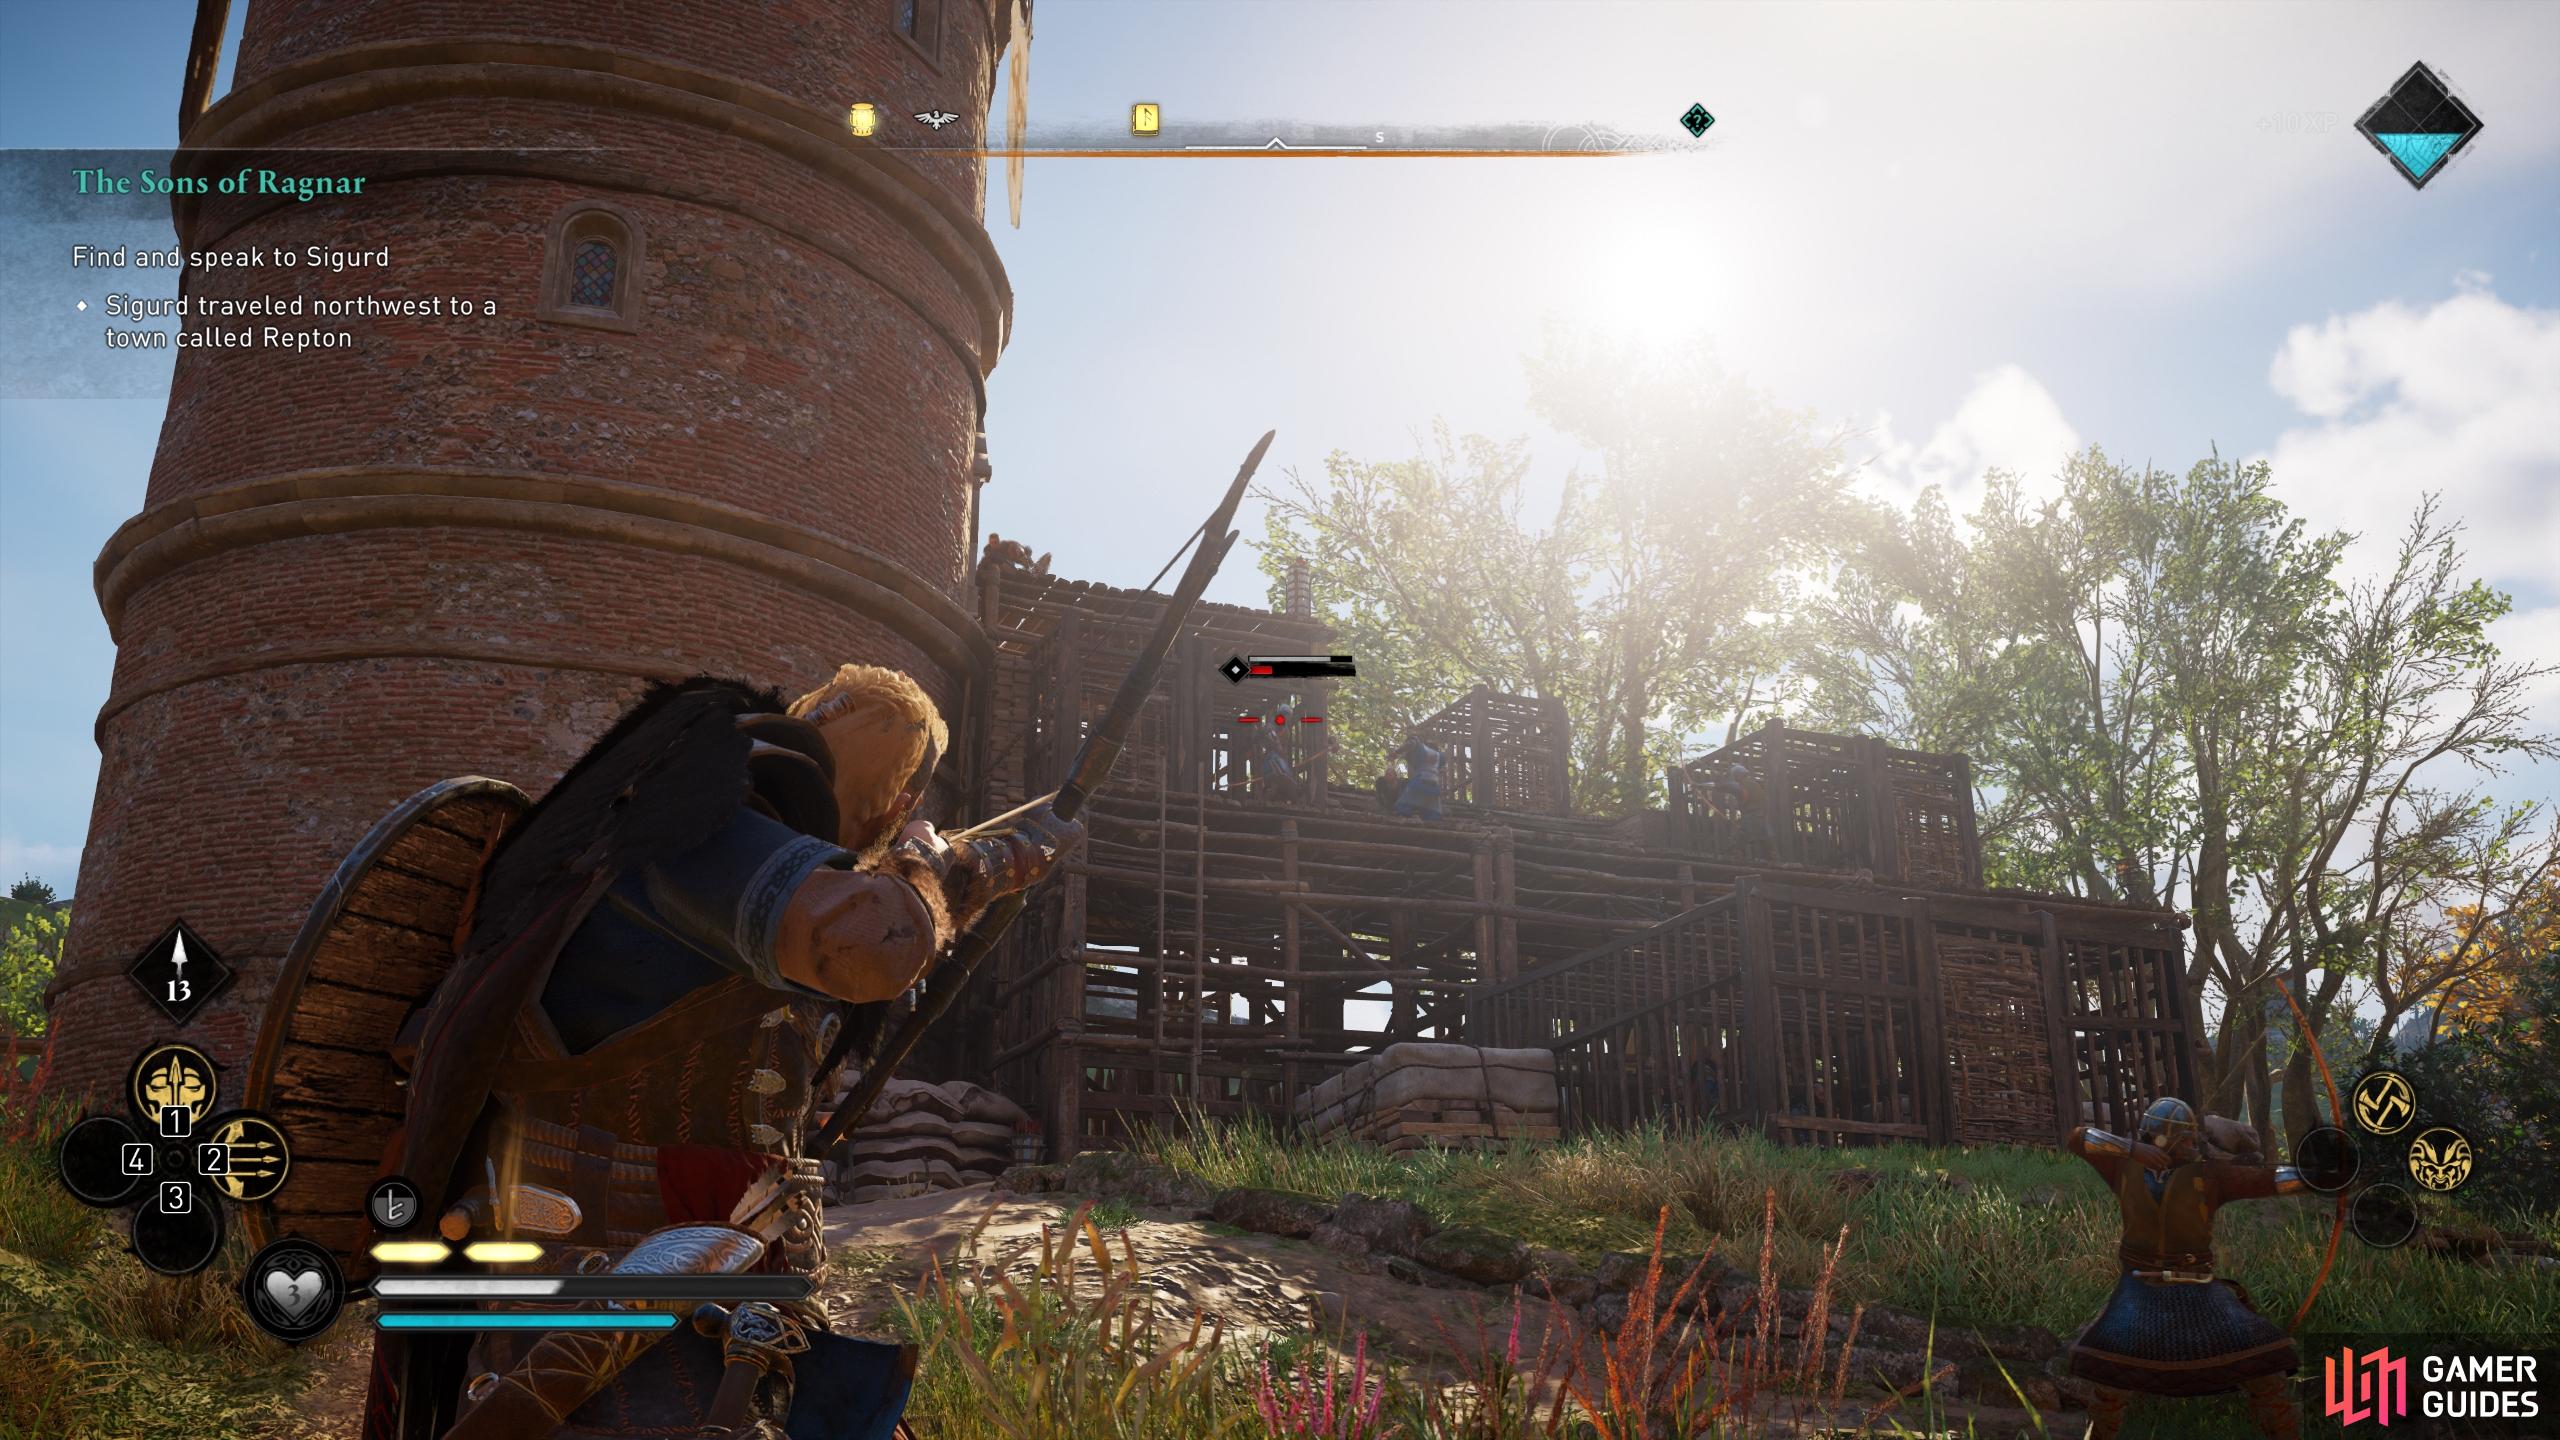 Take out the archers on the wooden structure to the right of the tower.